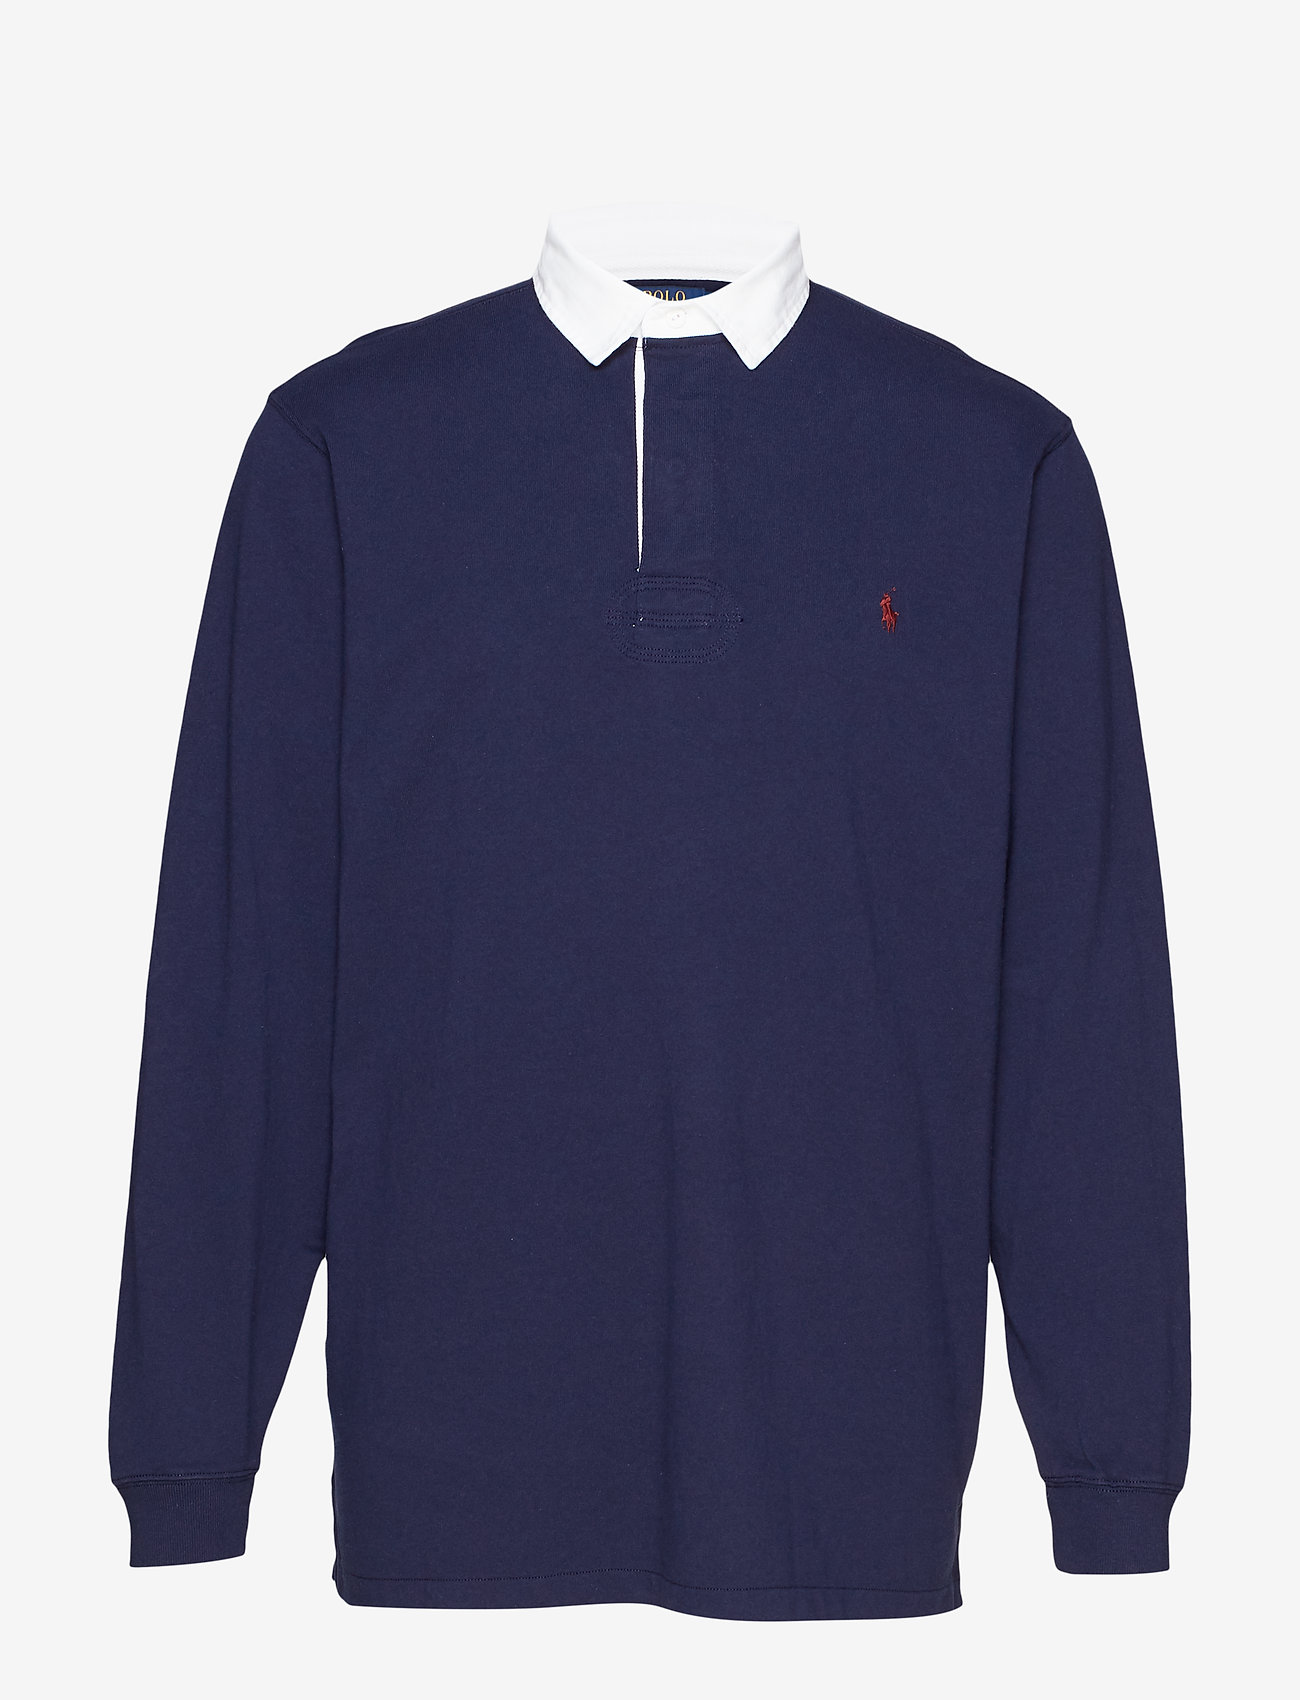 polo iconic rugby shirt